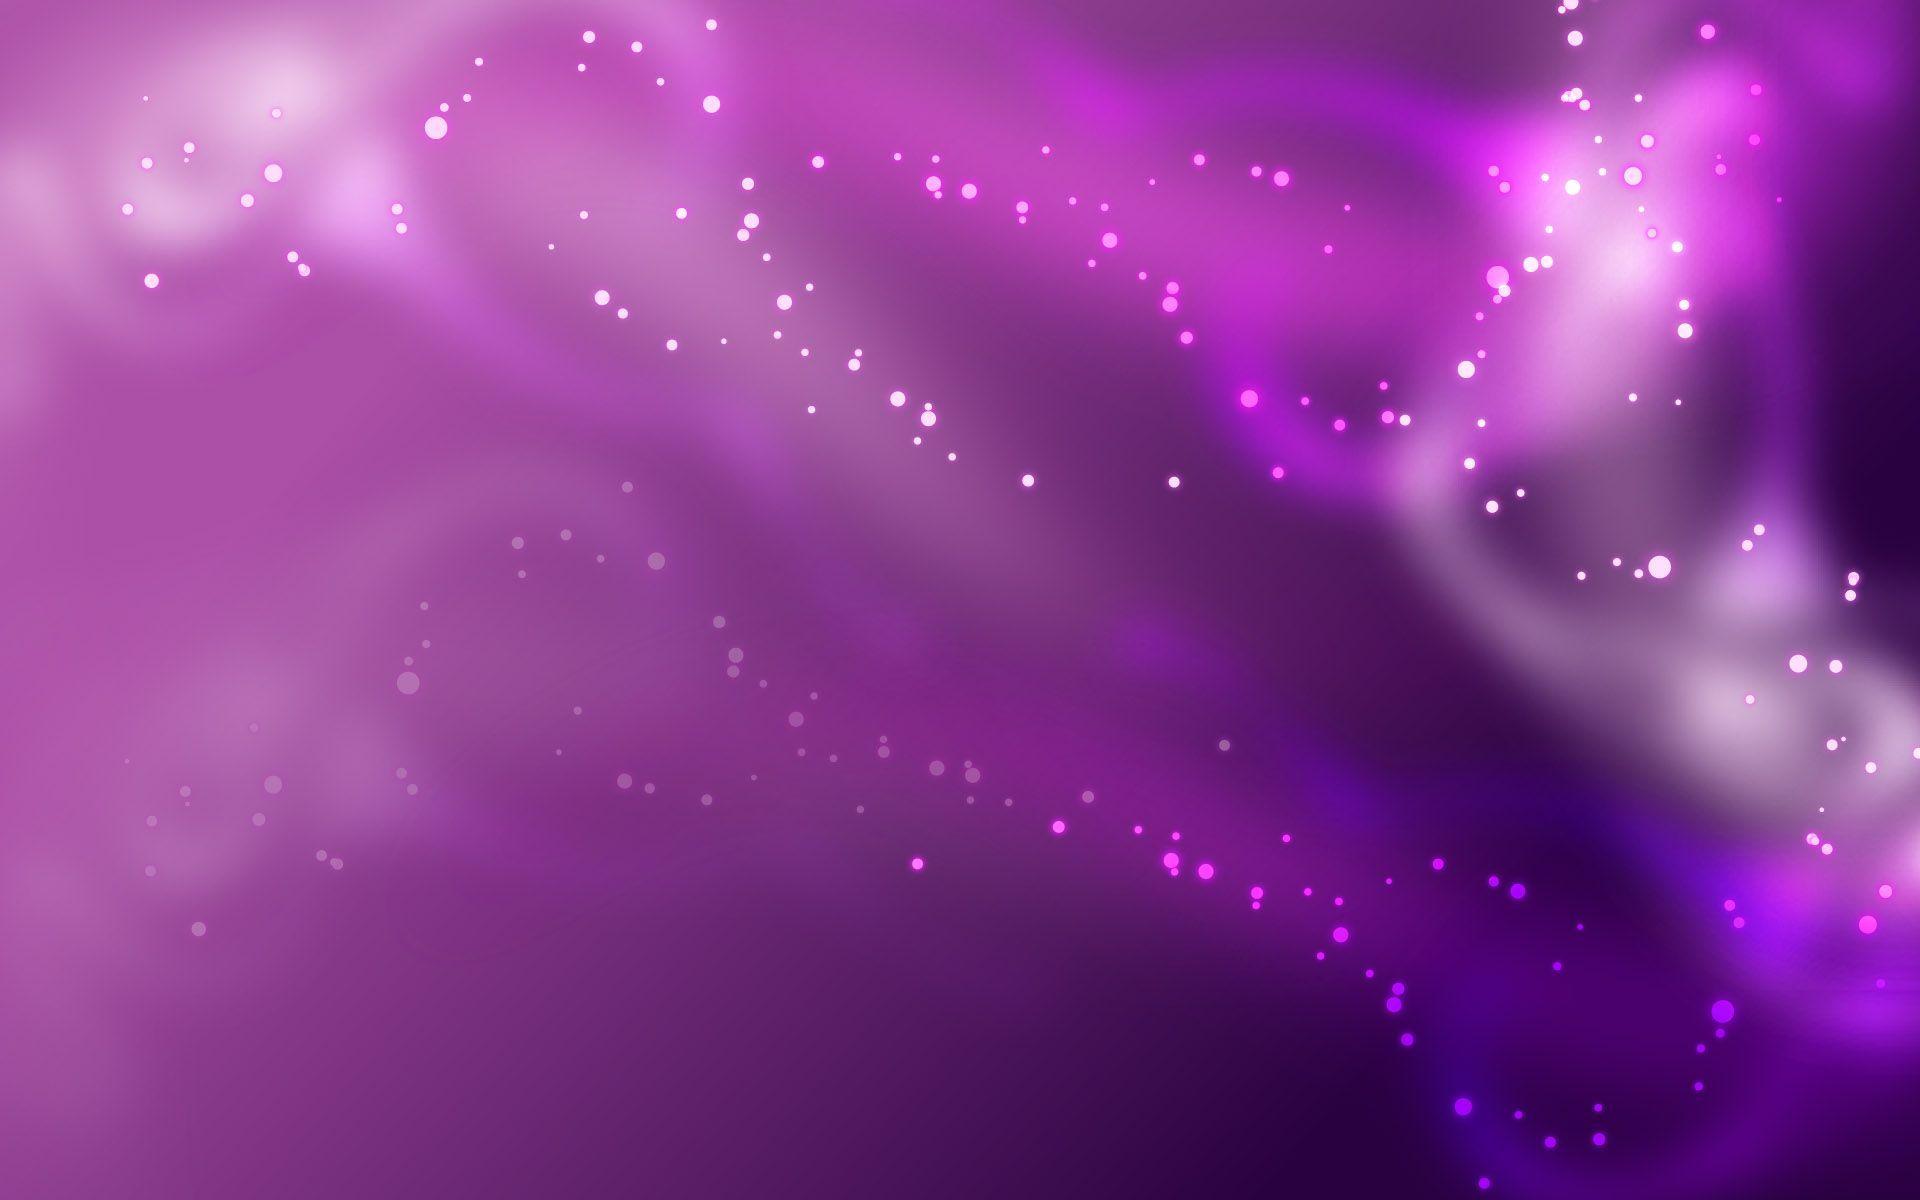 Free Purple Background With Stars And Flowers Background